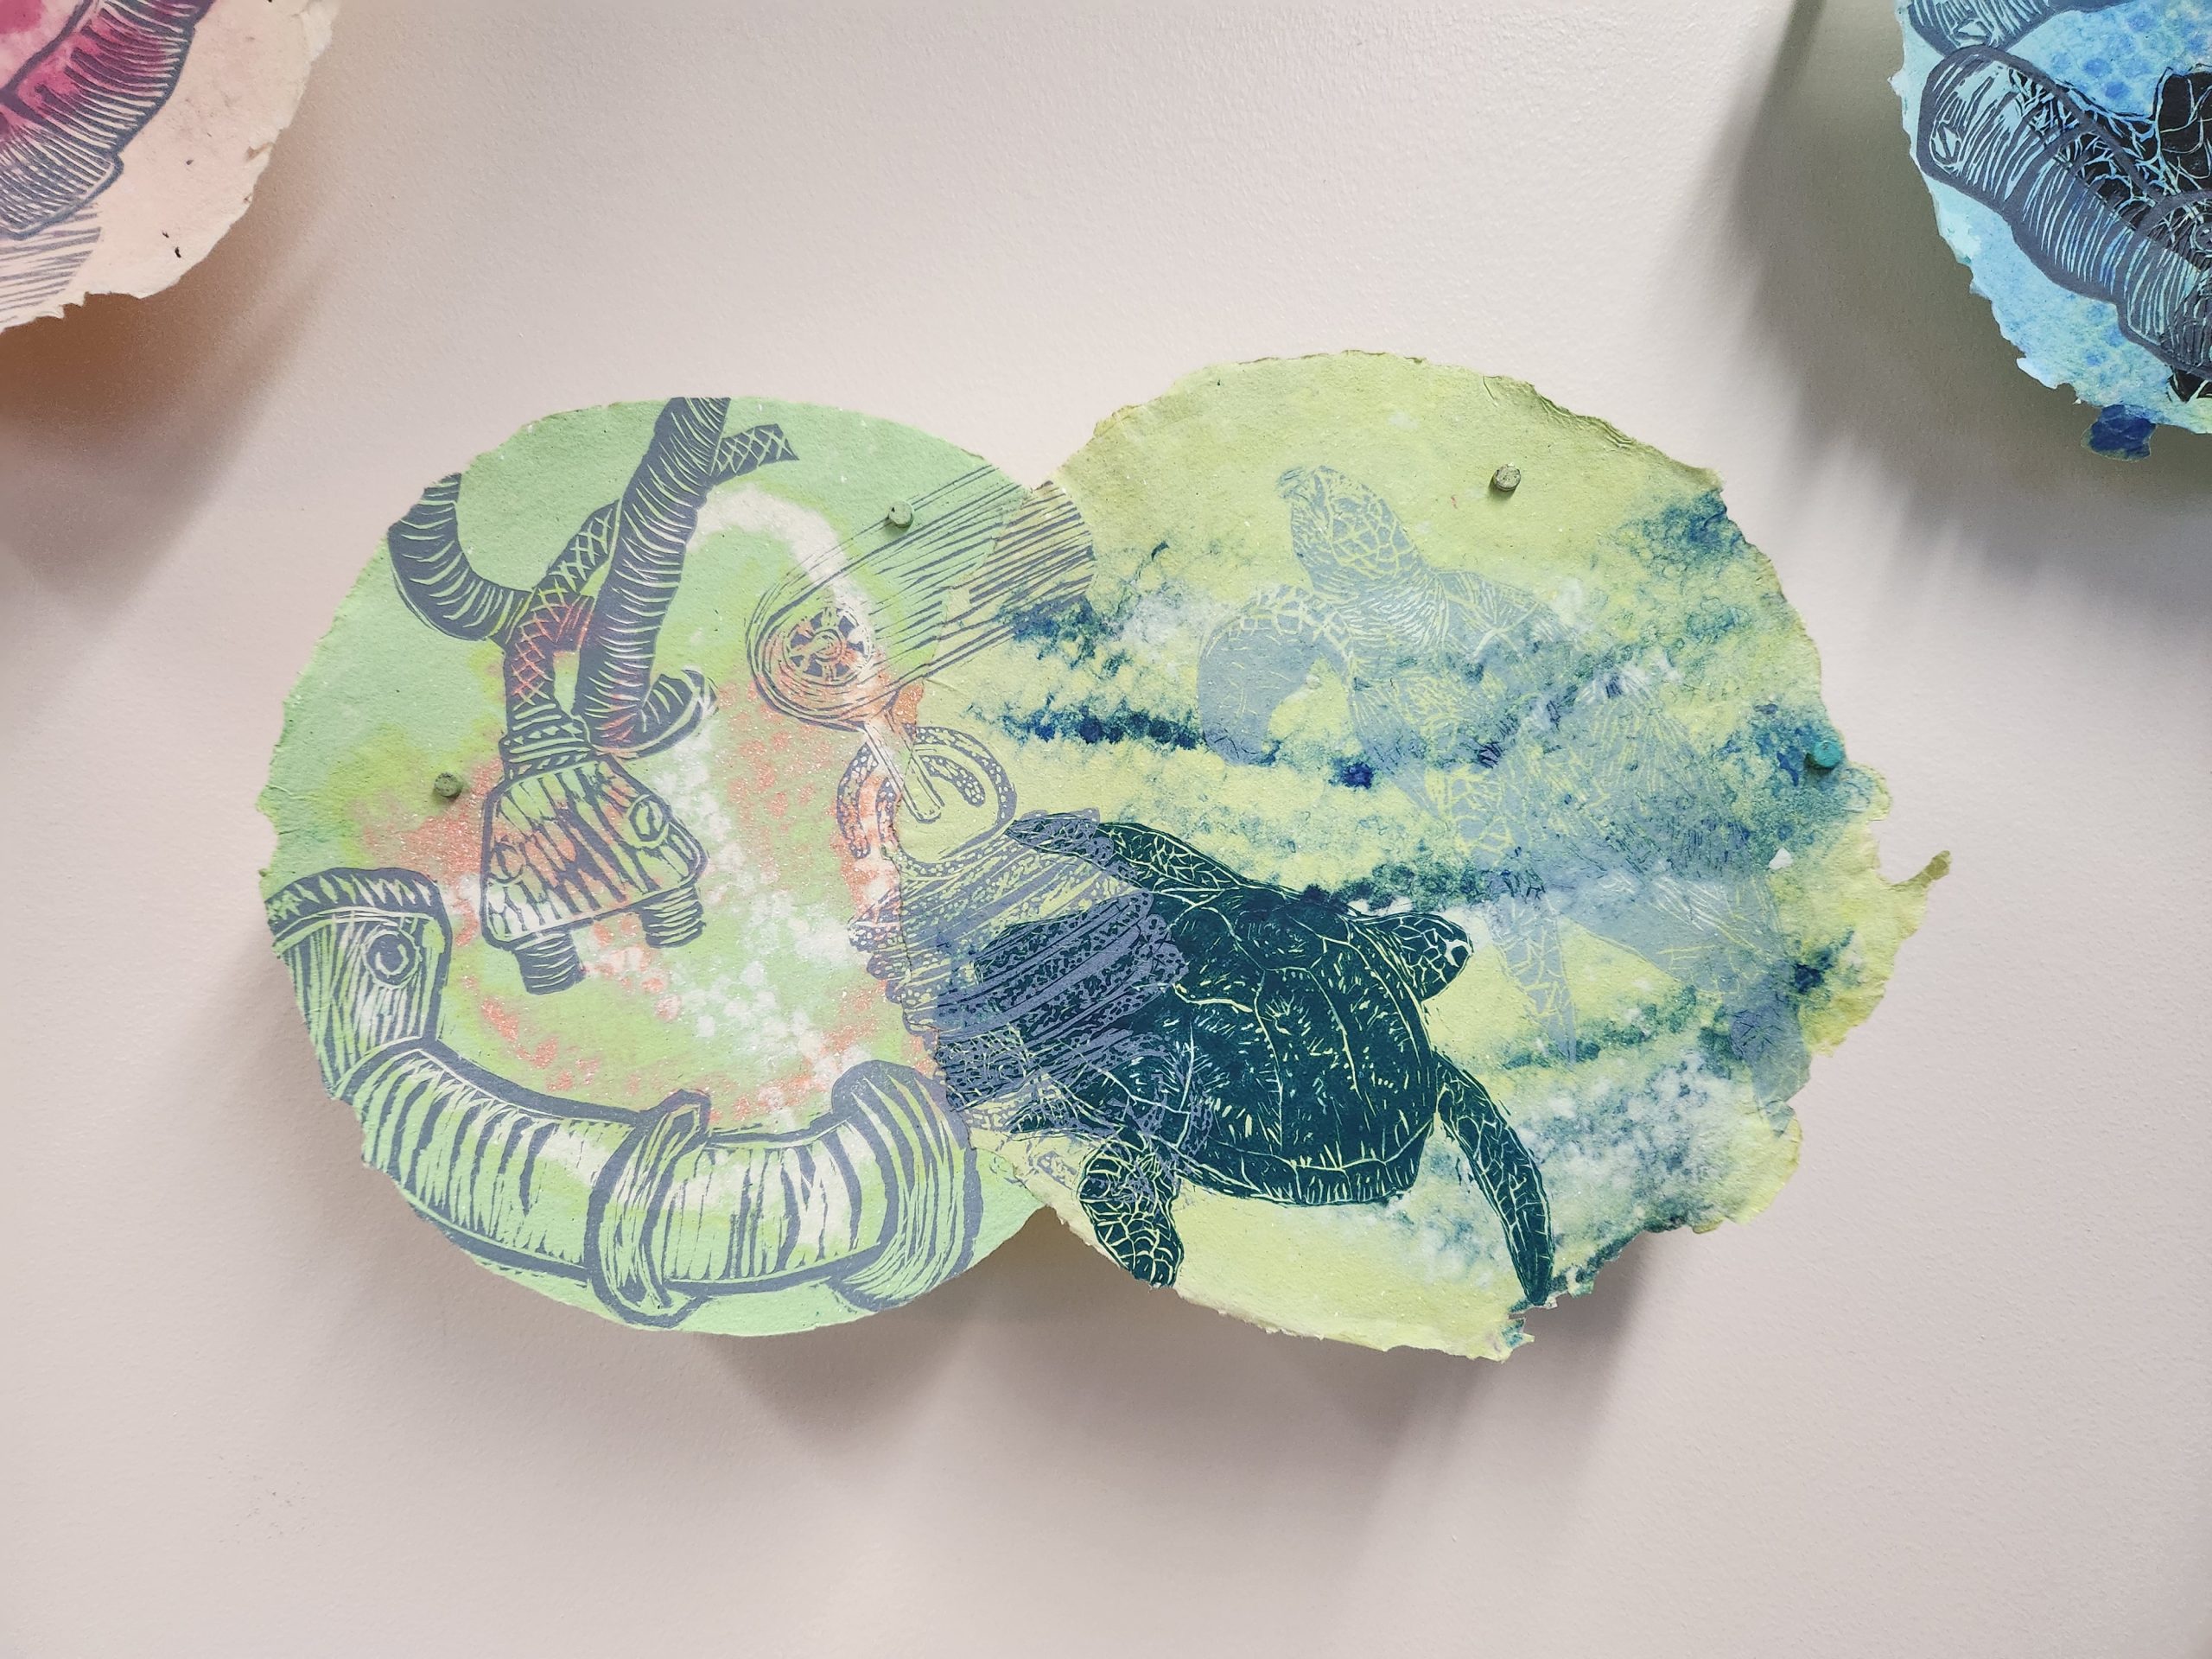 Marilyn Propp, "Ghost Divers," 2014. Relief print on handmade cotton paper with pulp painting, 9 ¾ x 16 ⅛ in. Part of "Pulped Under Pressure," 2022. Installation view, Glickman Family Library.